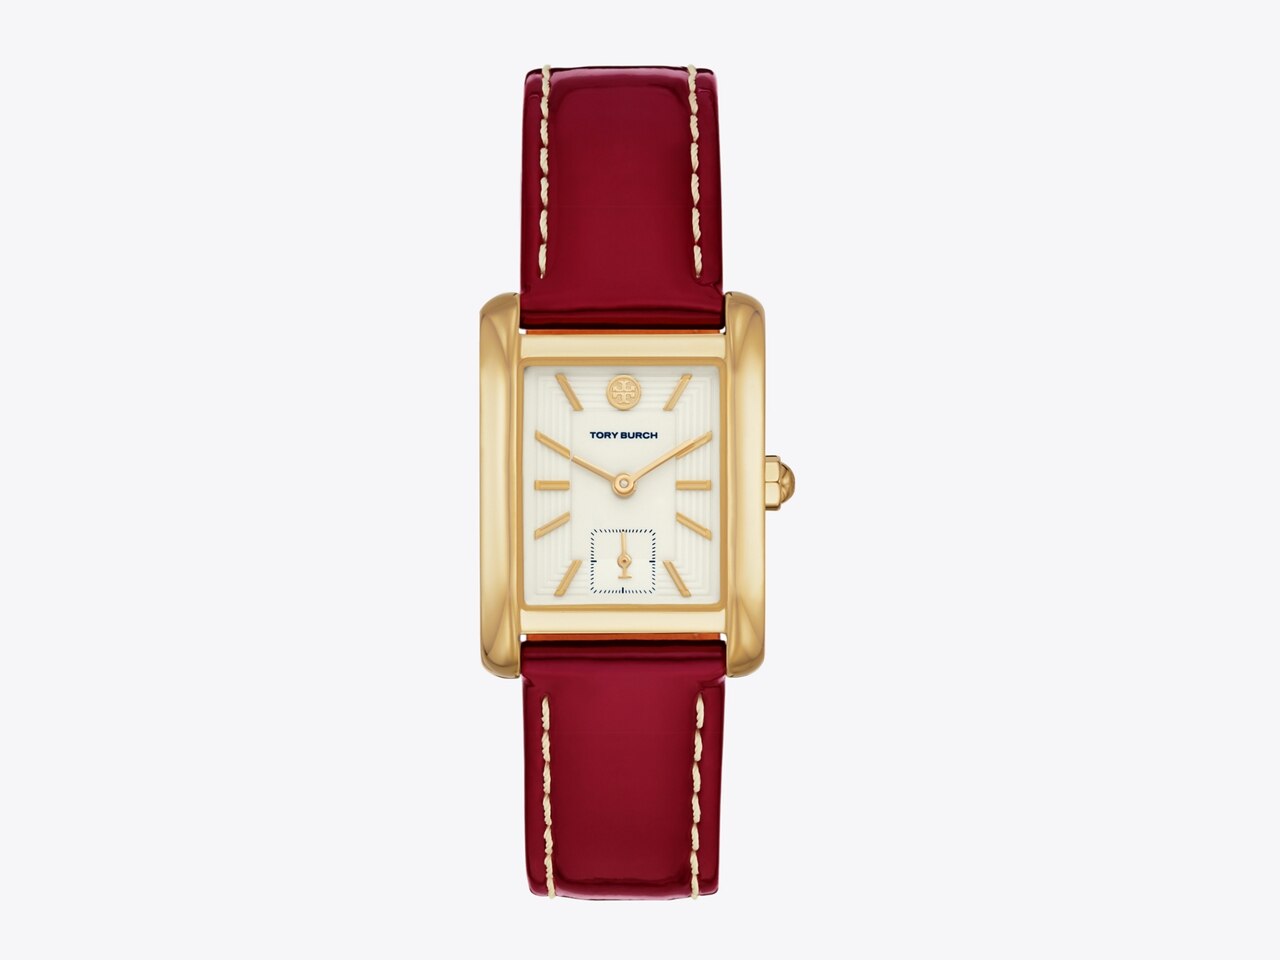 Miller Watch, Two-Tone Stainless Steel/Gold/Ivory, 36 MM: Women's Designer  Strap Watches